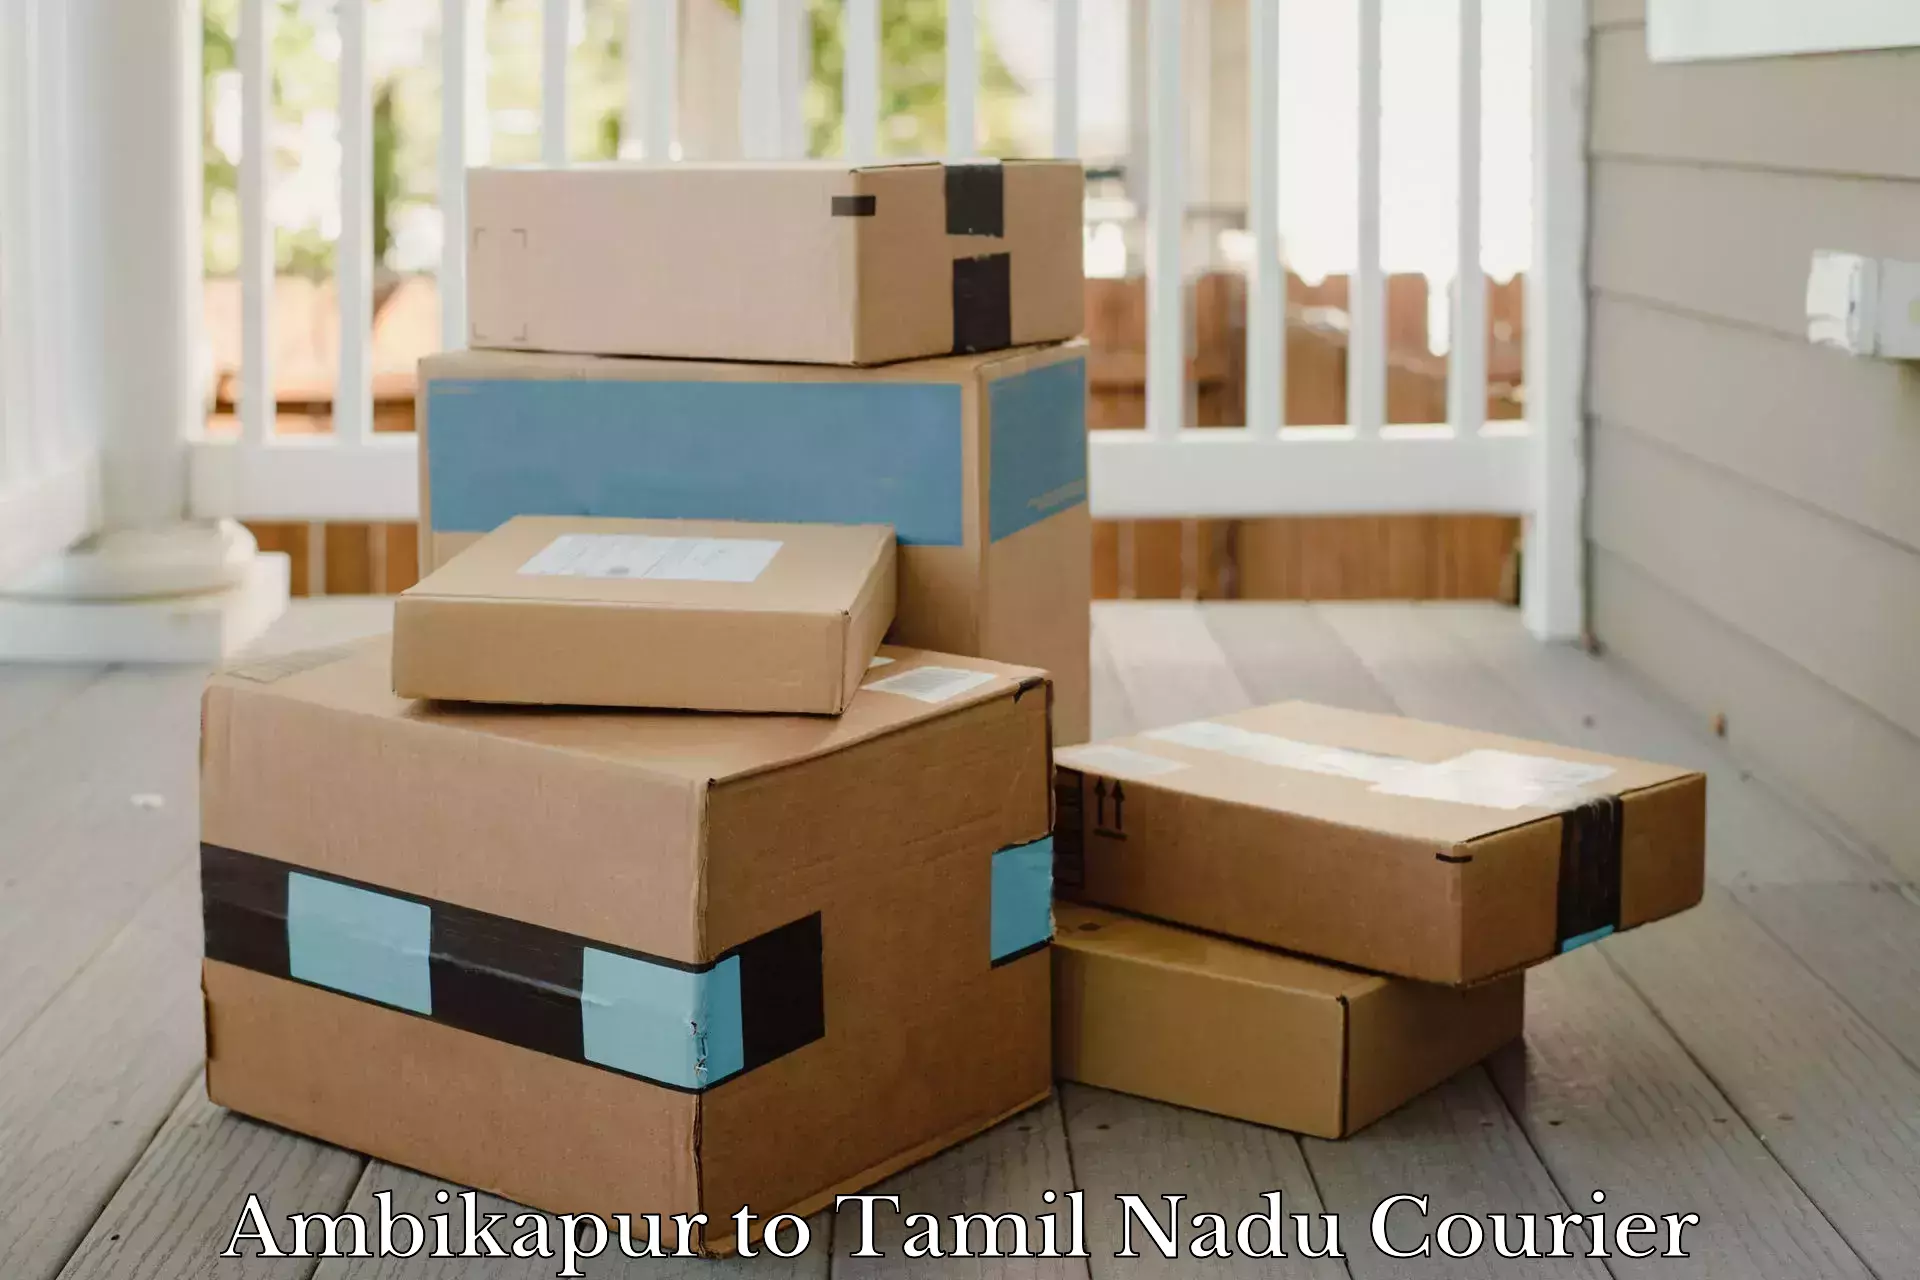 Courier service efficiency Ambikapur to Gudalur